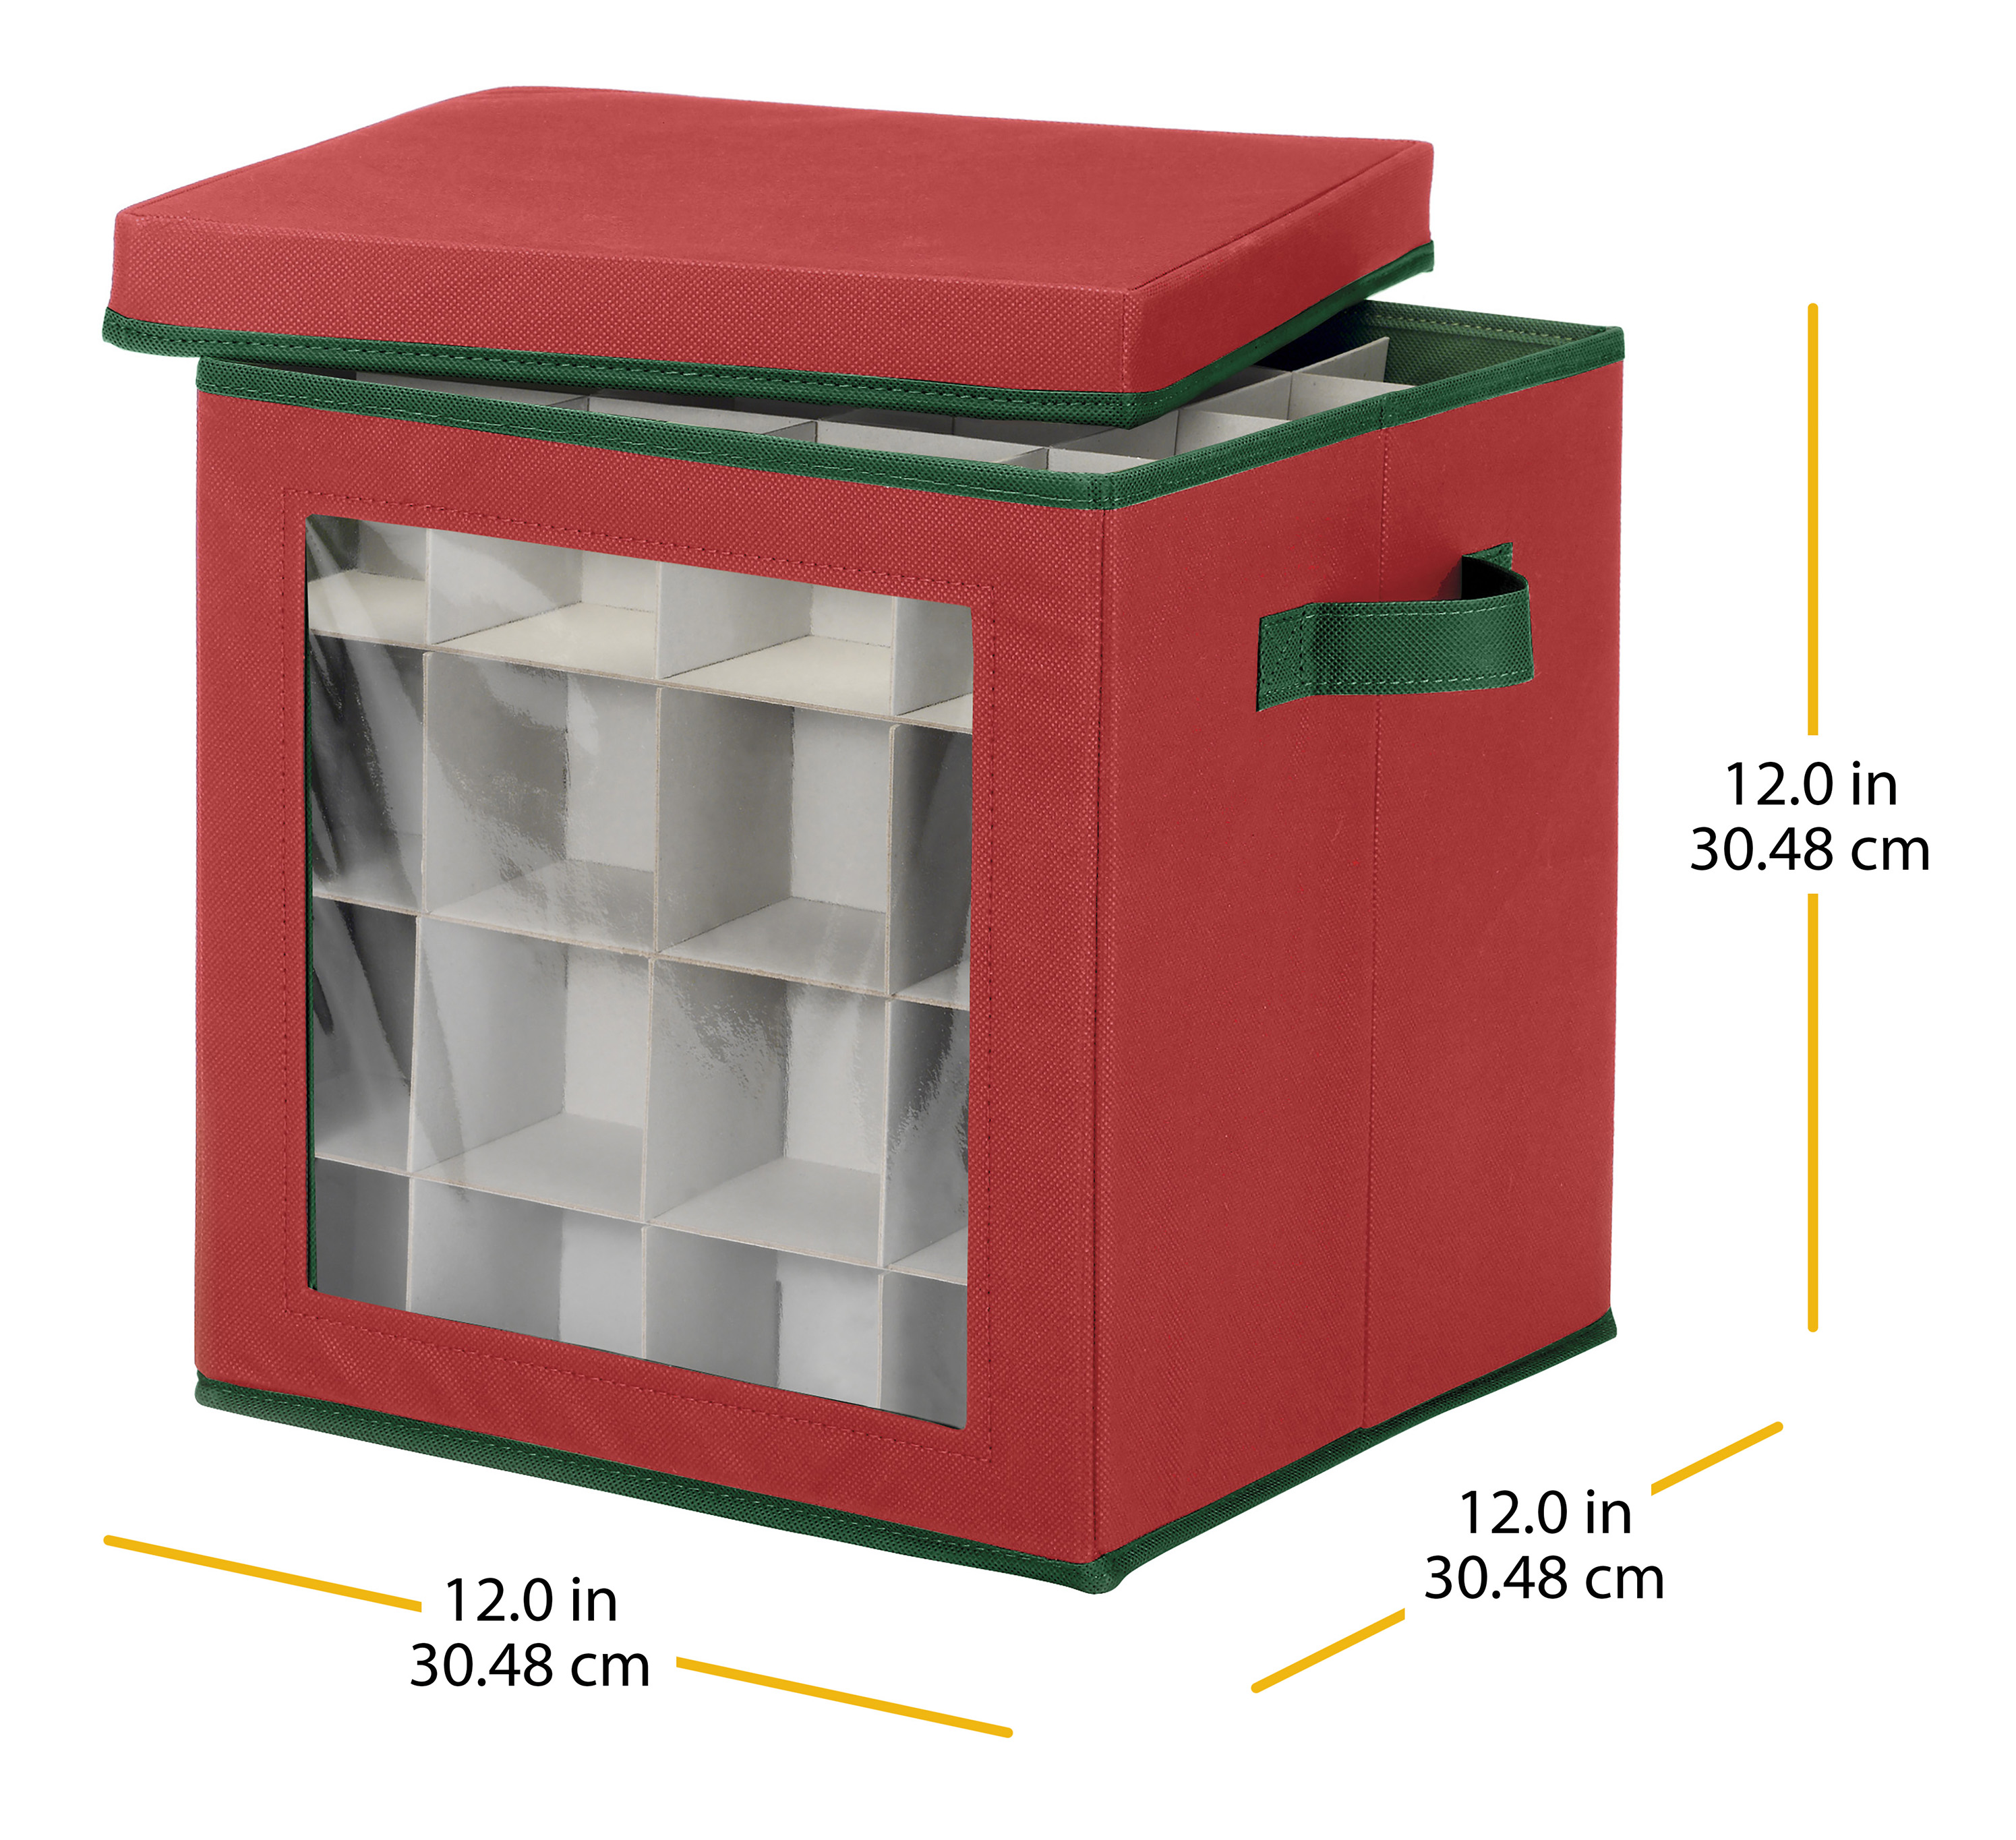 Whitmor Ornament Storage Cube - 64 Compartments - PPNW Red - 12" x 12" x 12" for Adult Use - image 2 of 7